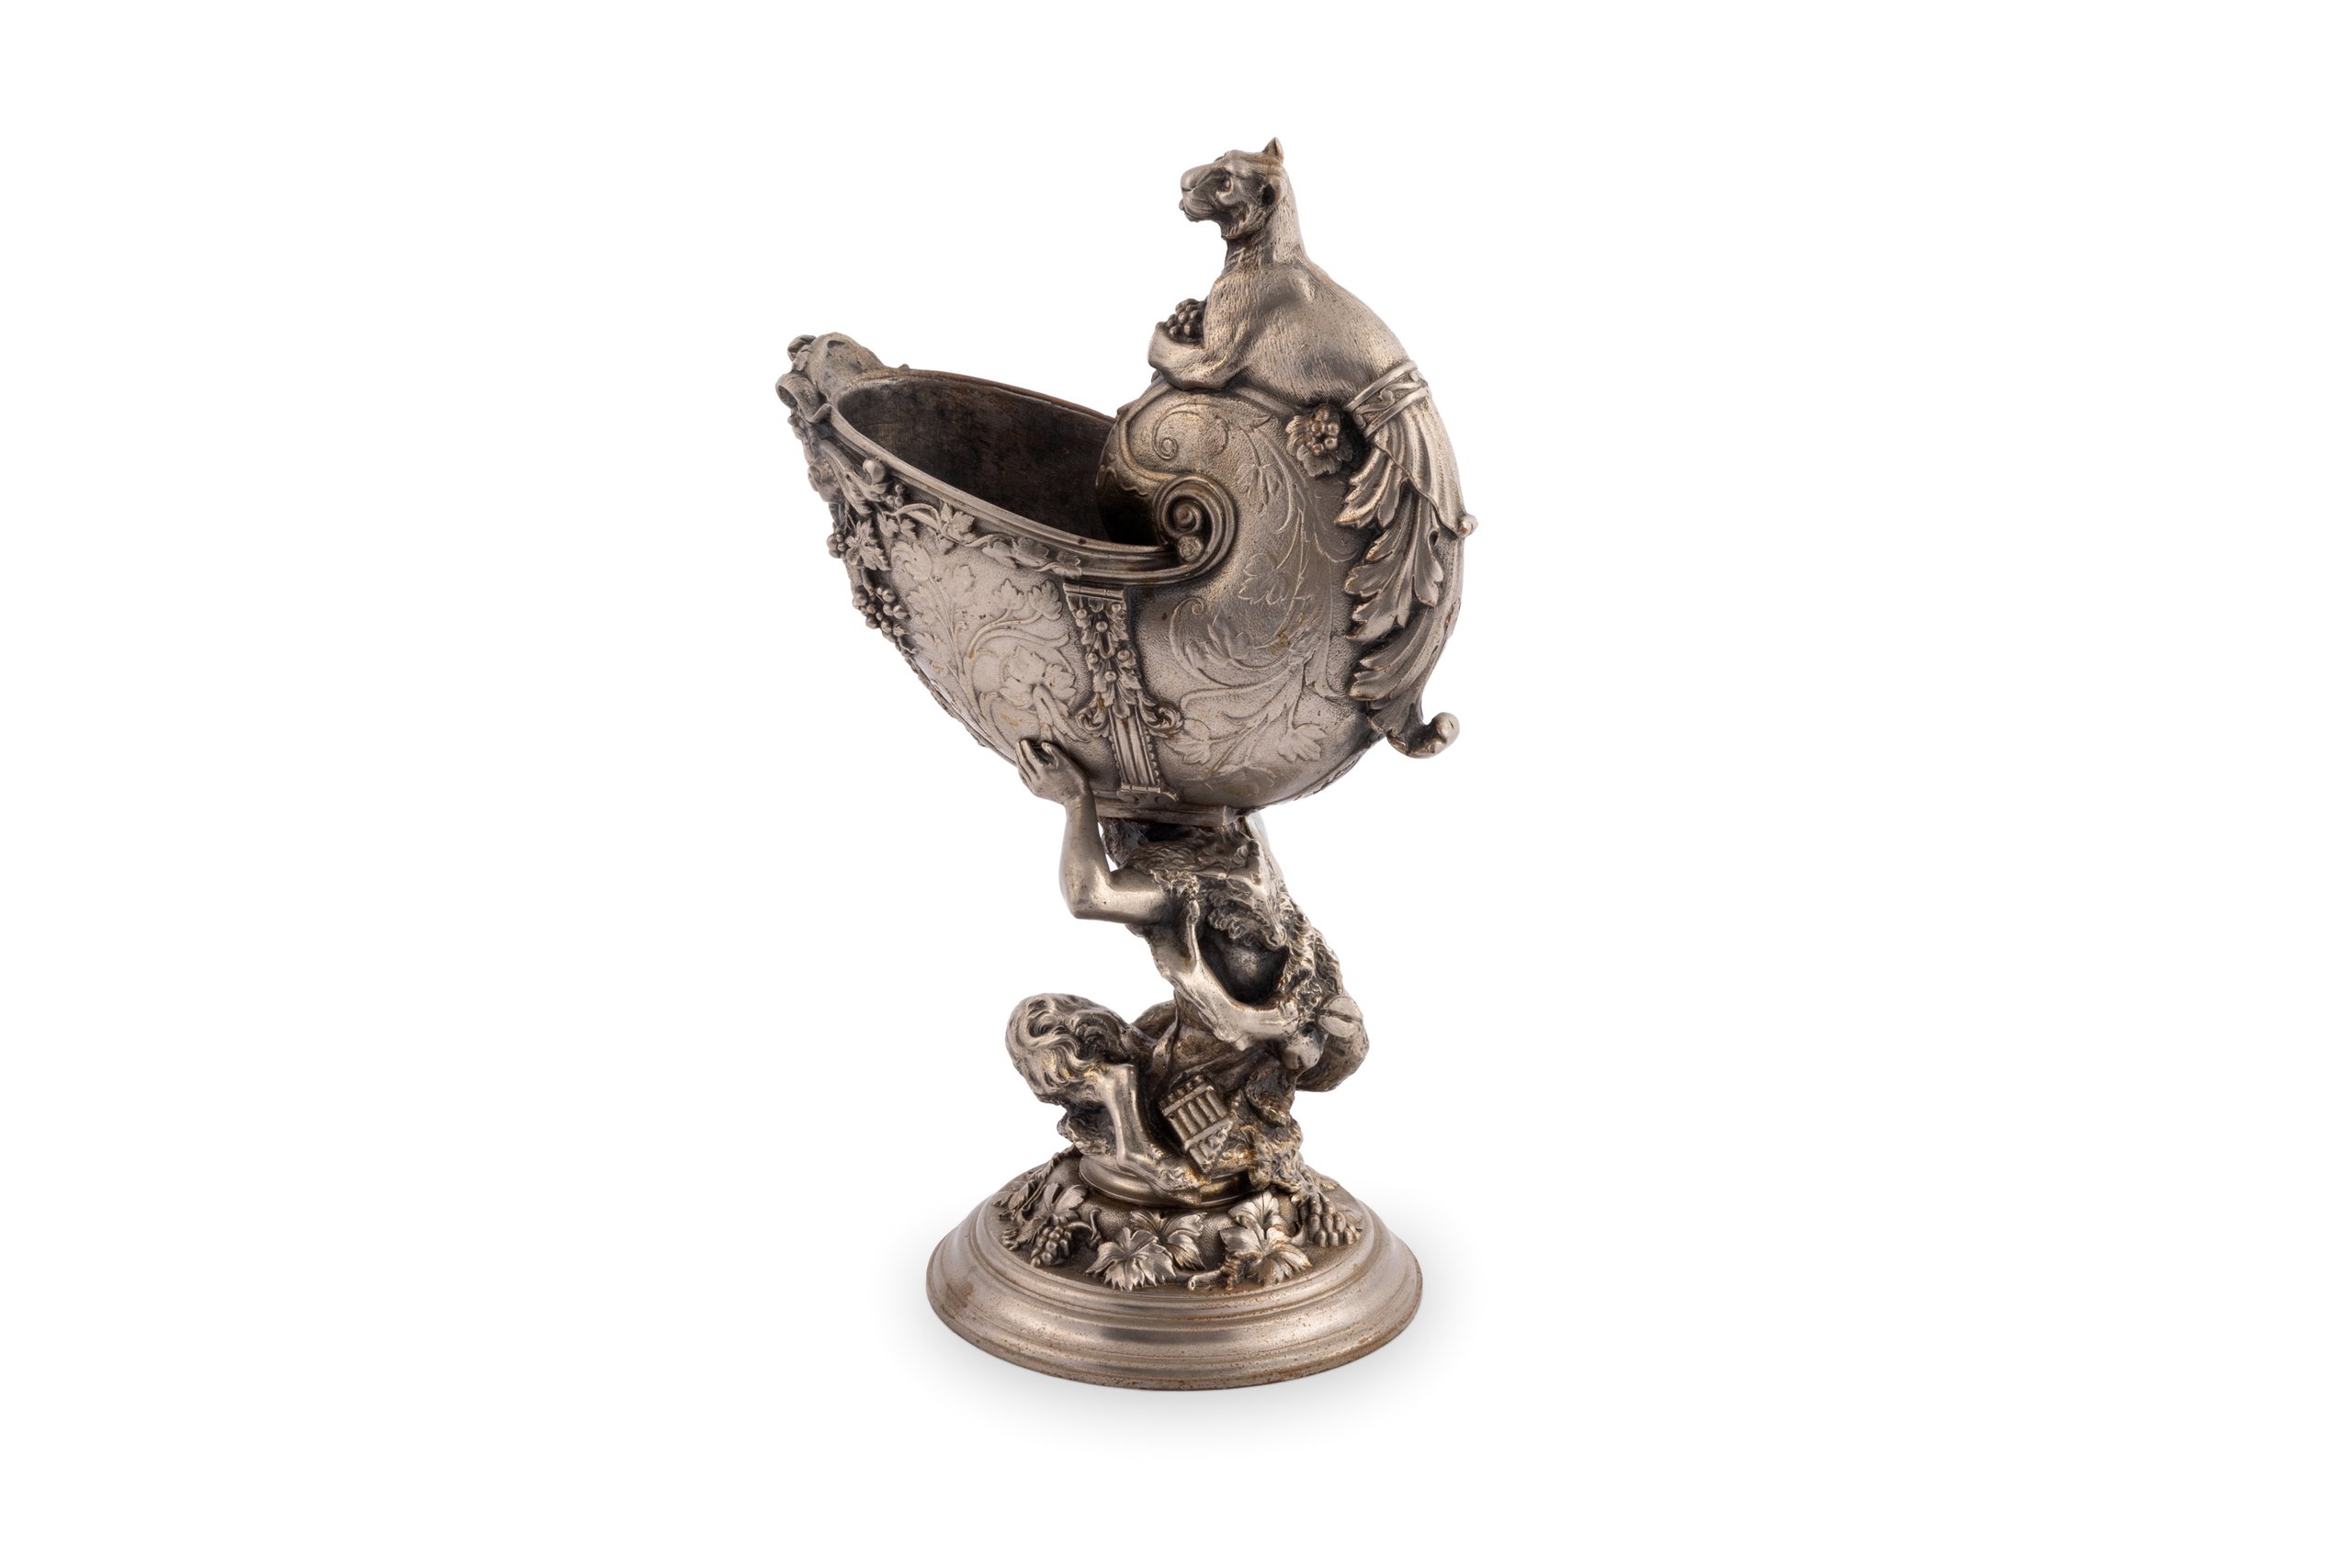 Electrotype (galvanoplasty) reproduction of a (possibly) 17th century original cup from Germany